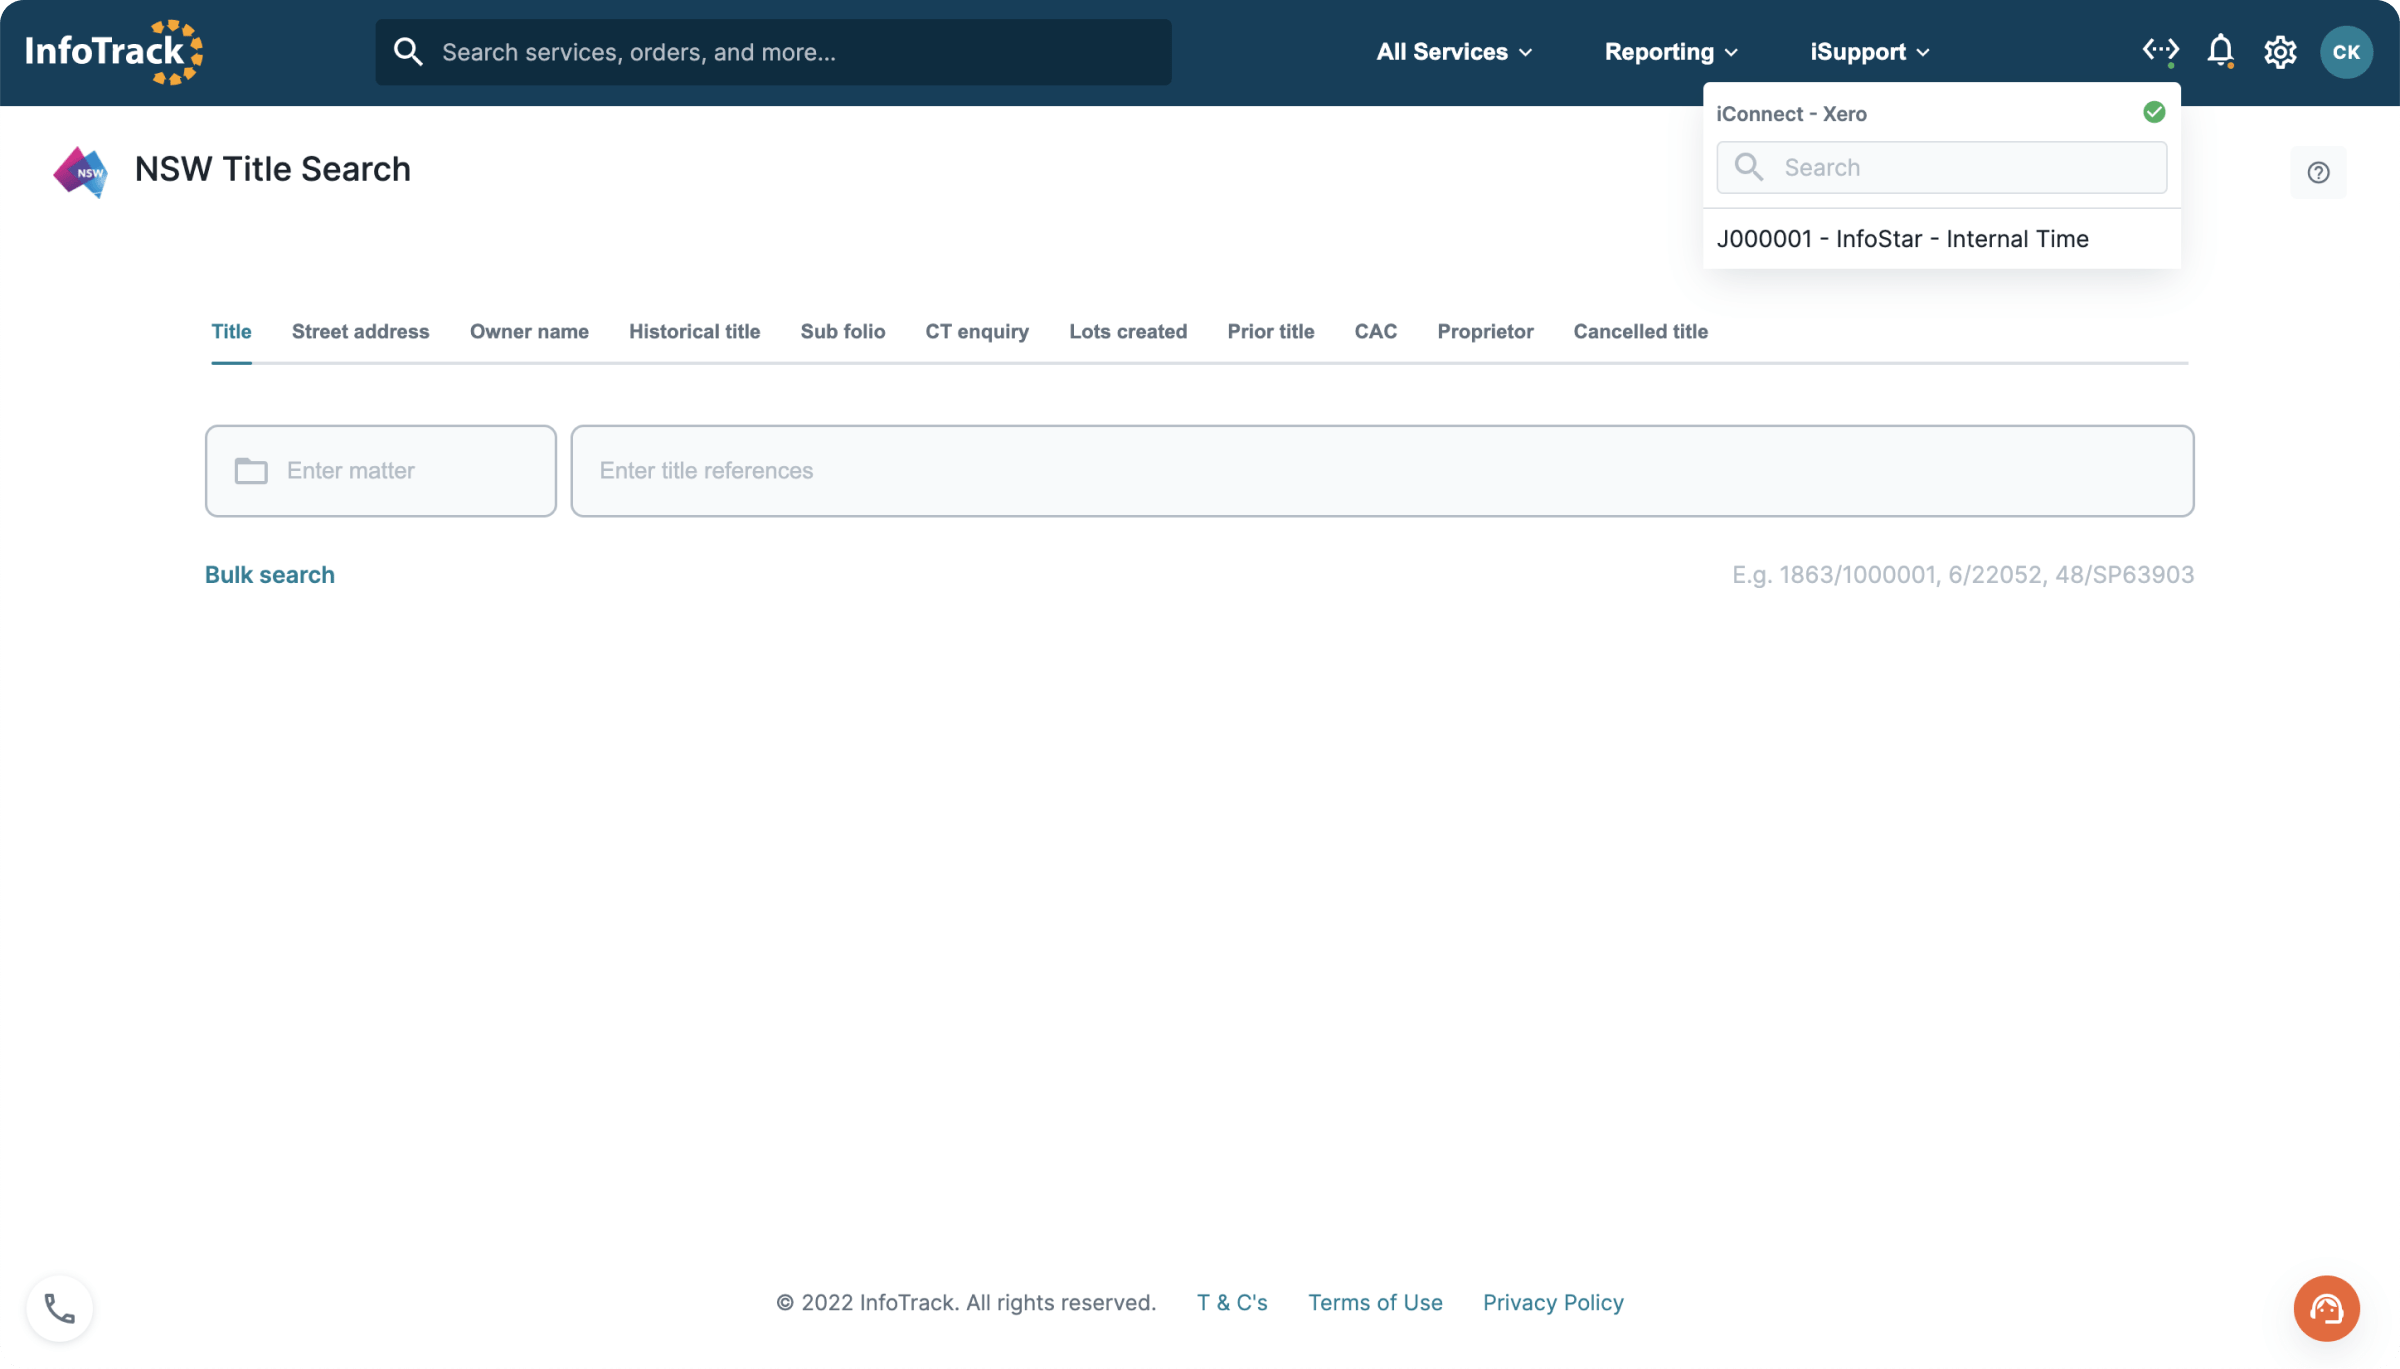 The integration reads a list of jobs from your Xero database. You select the desired job from the dropdown box in the top right of the website.